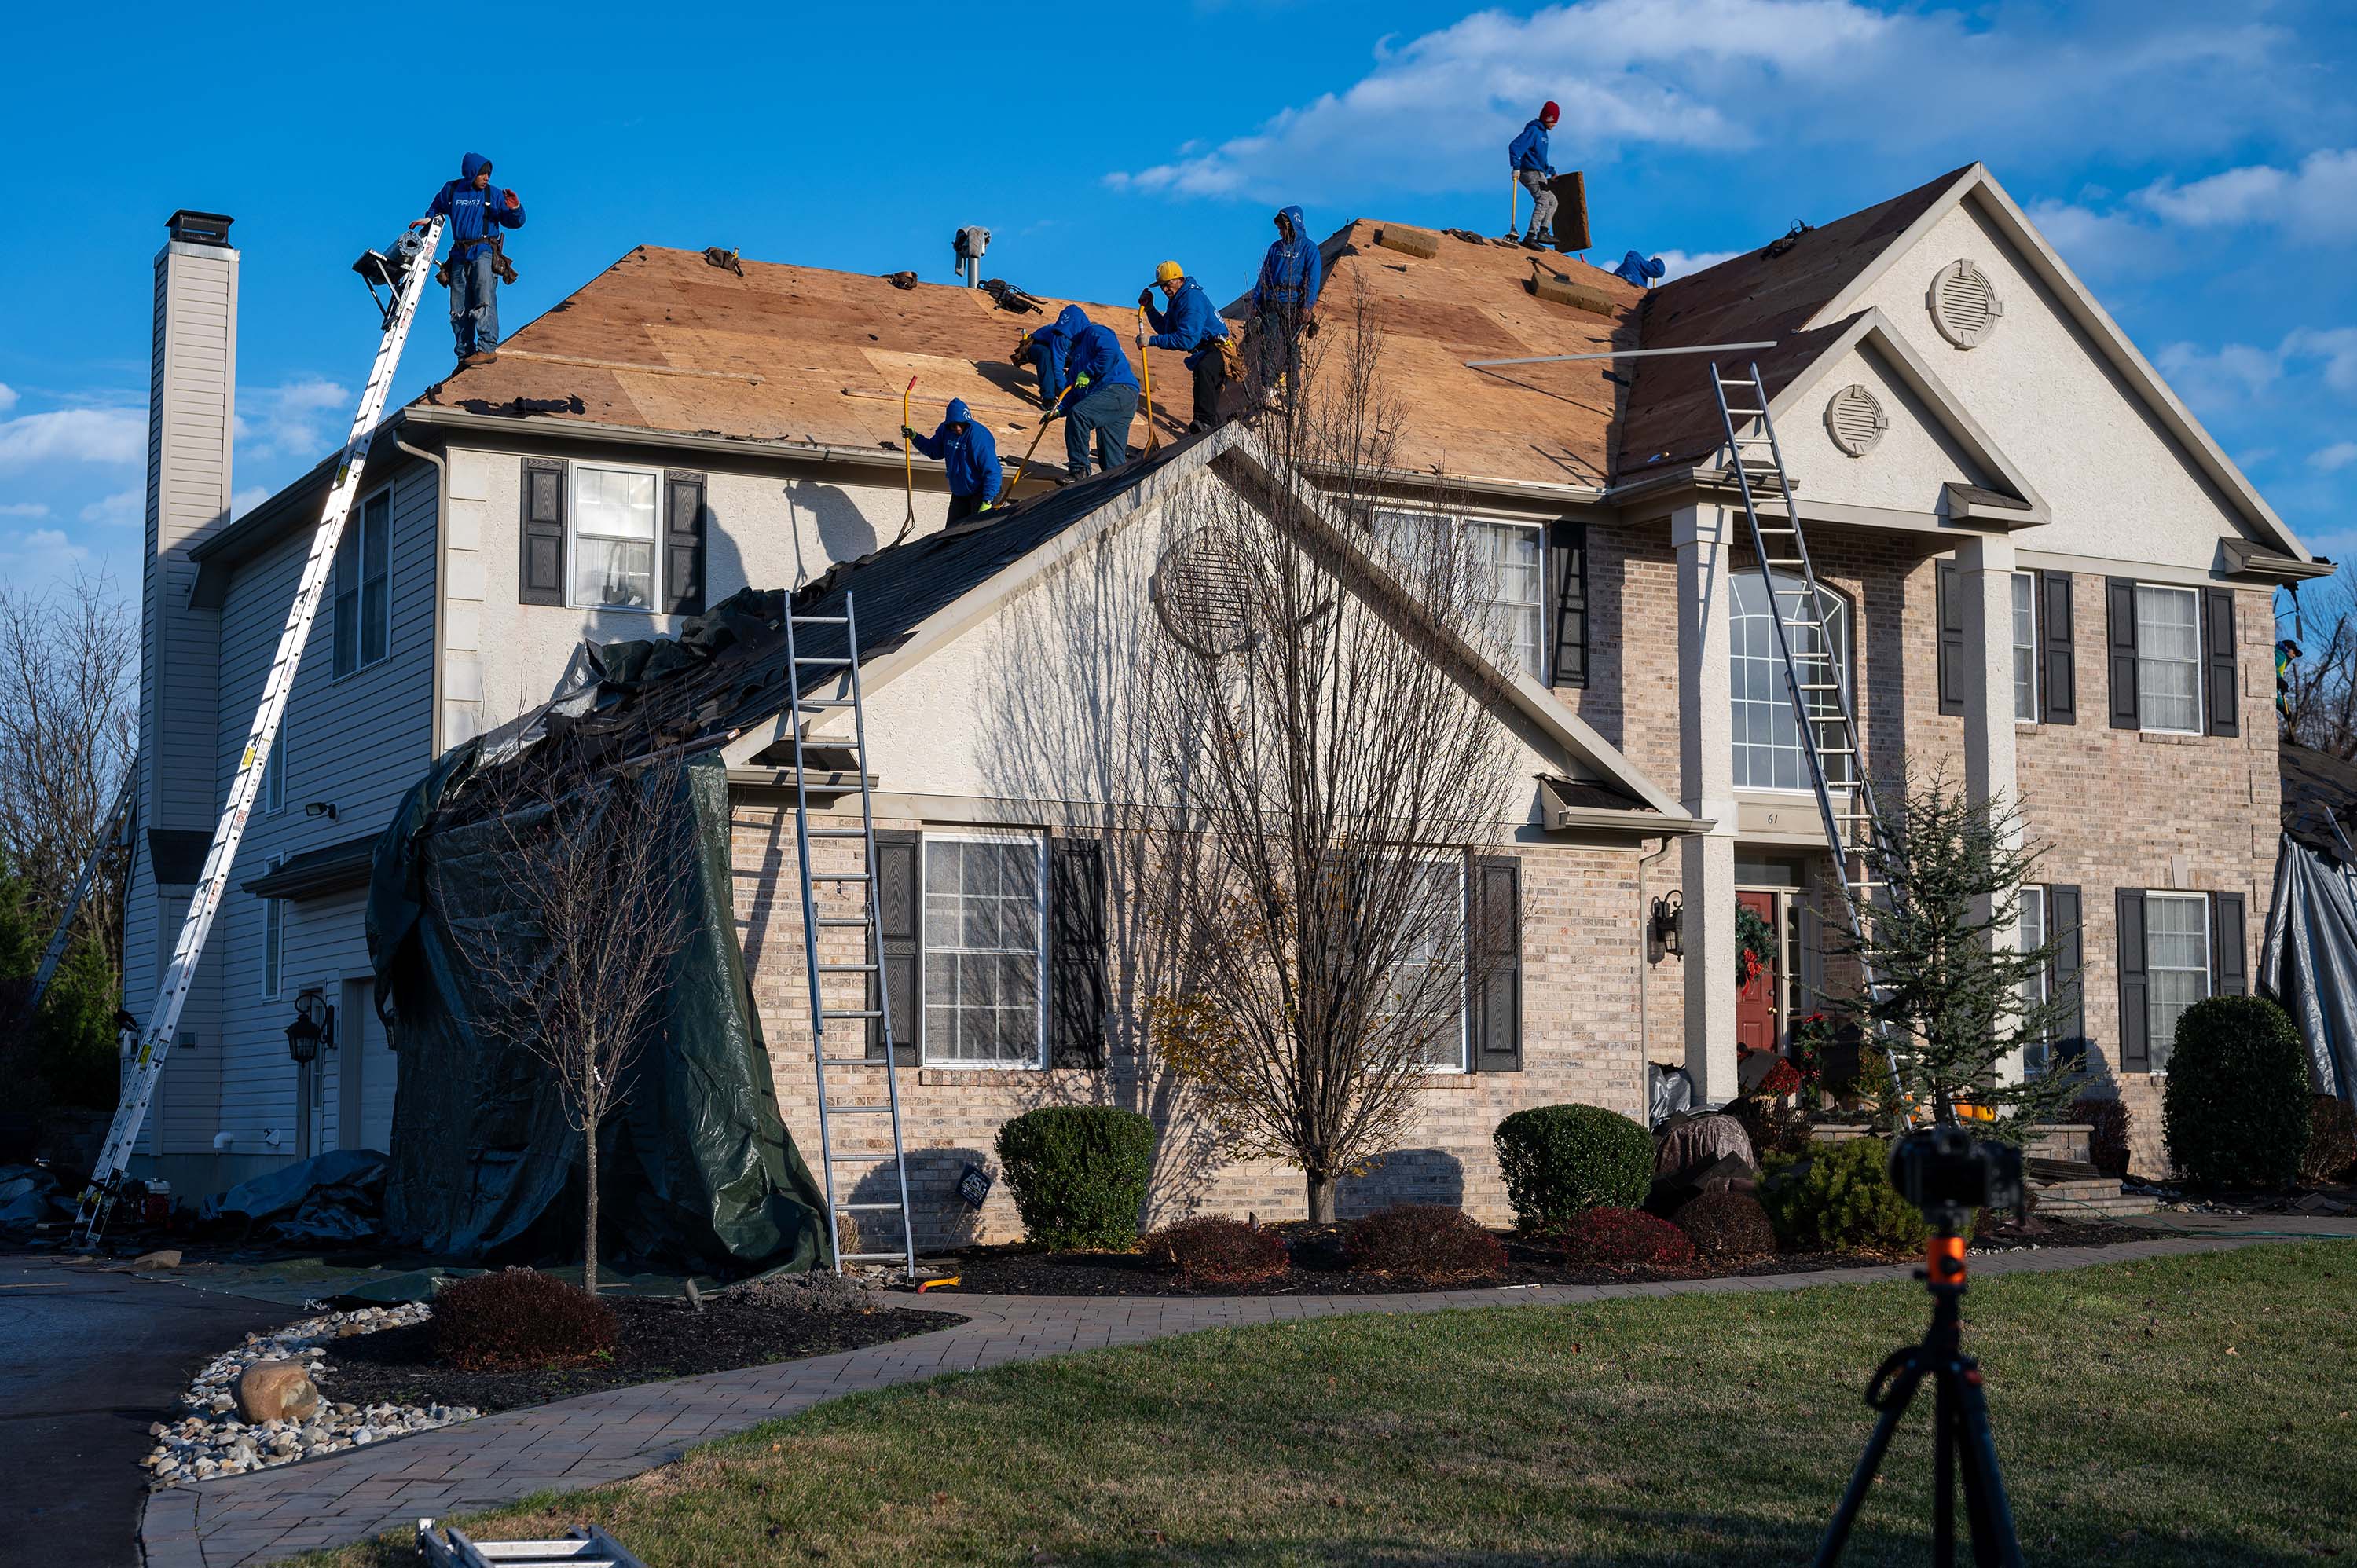 Washington Roofing repair company - residential roofing contractors in Washington, PA (large image)